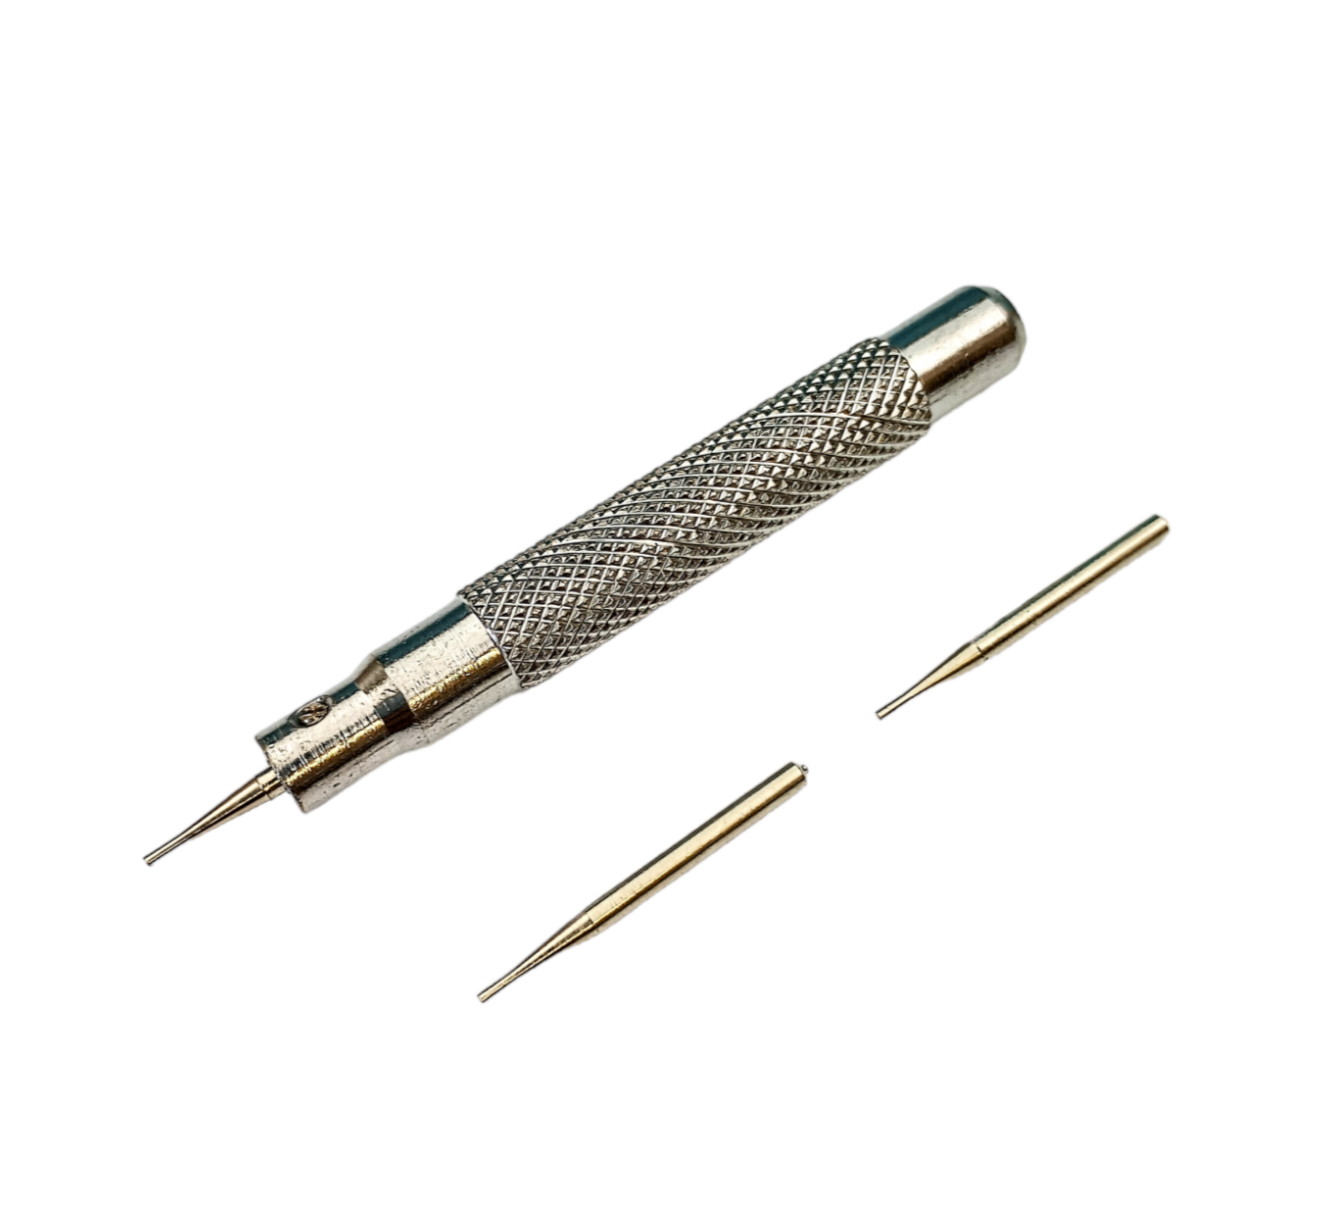 73000 Miniature pin punch and rivetting tool with 3 spare tips